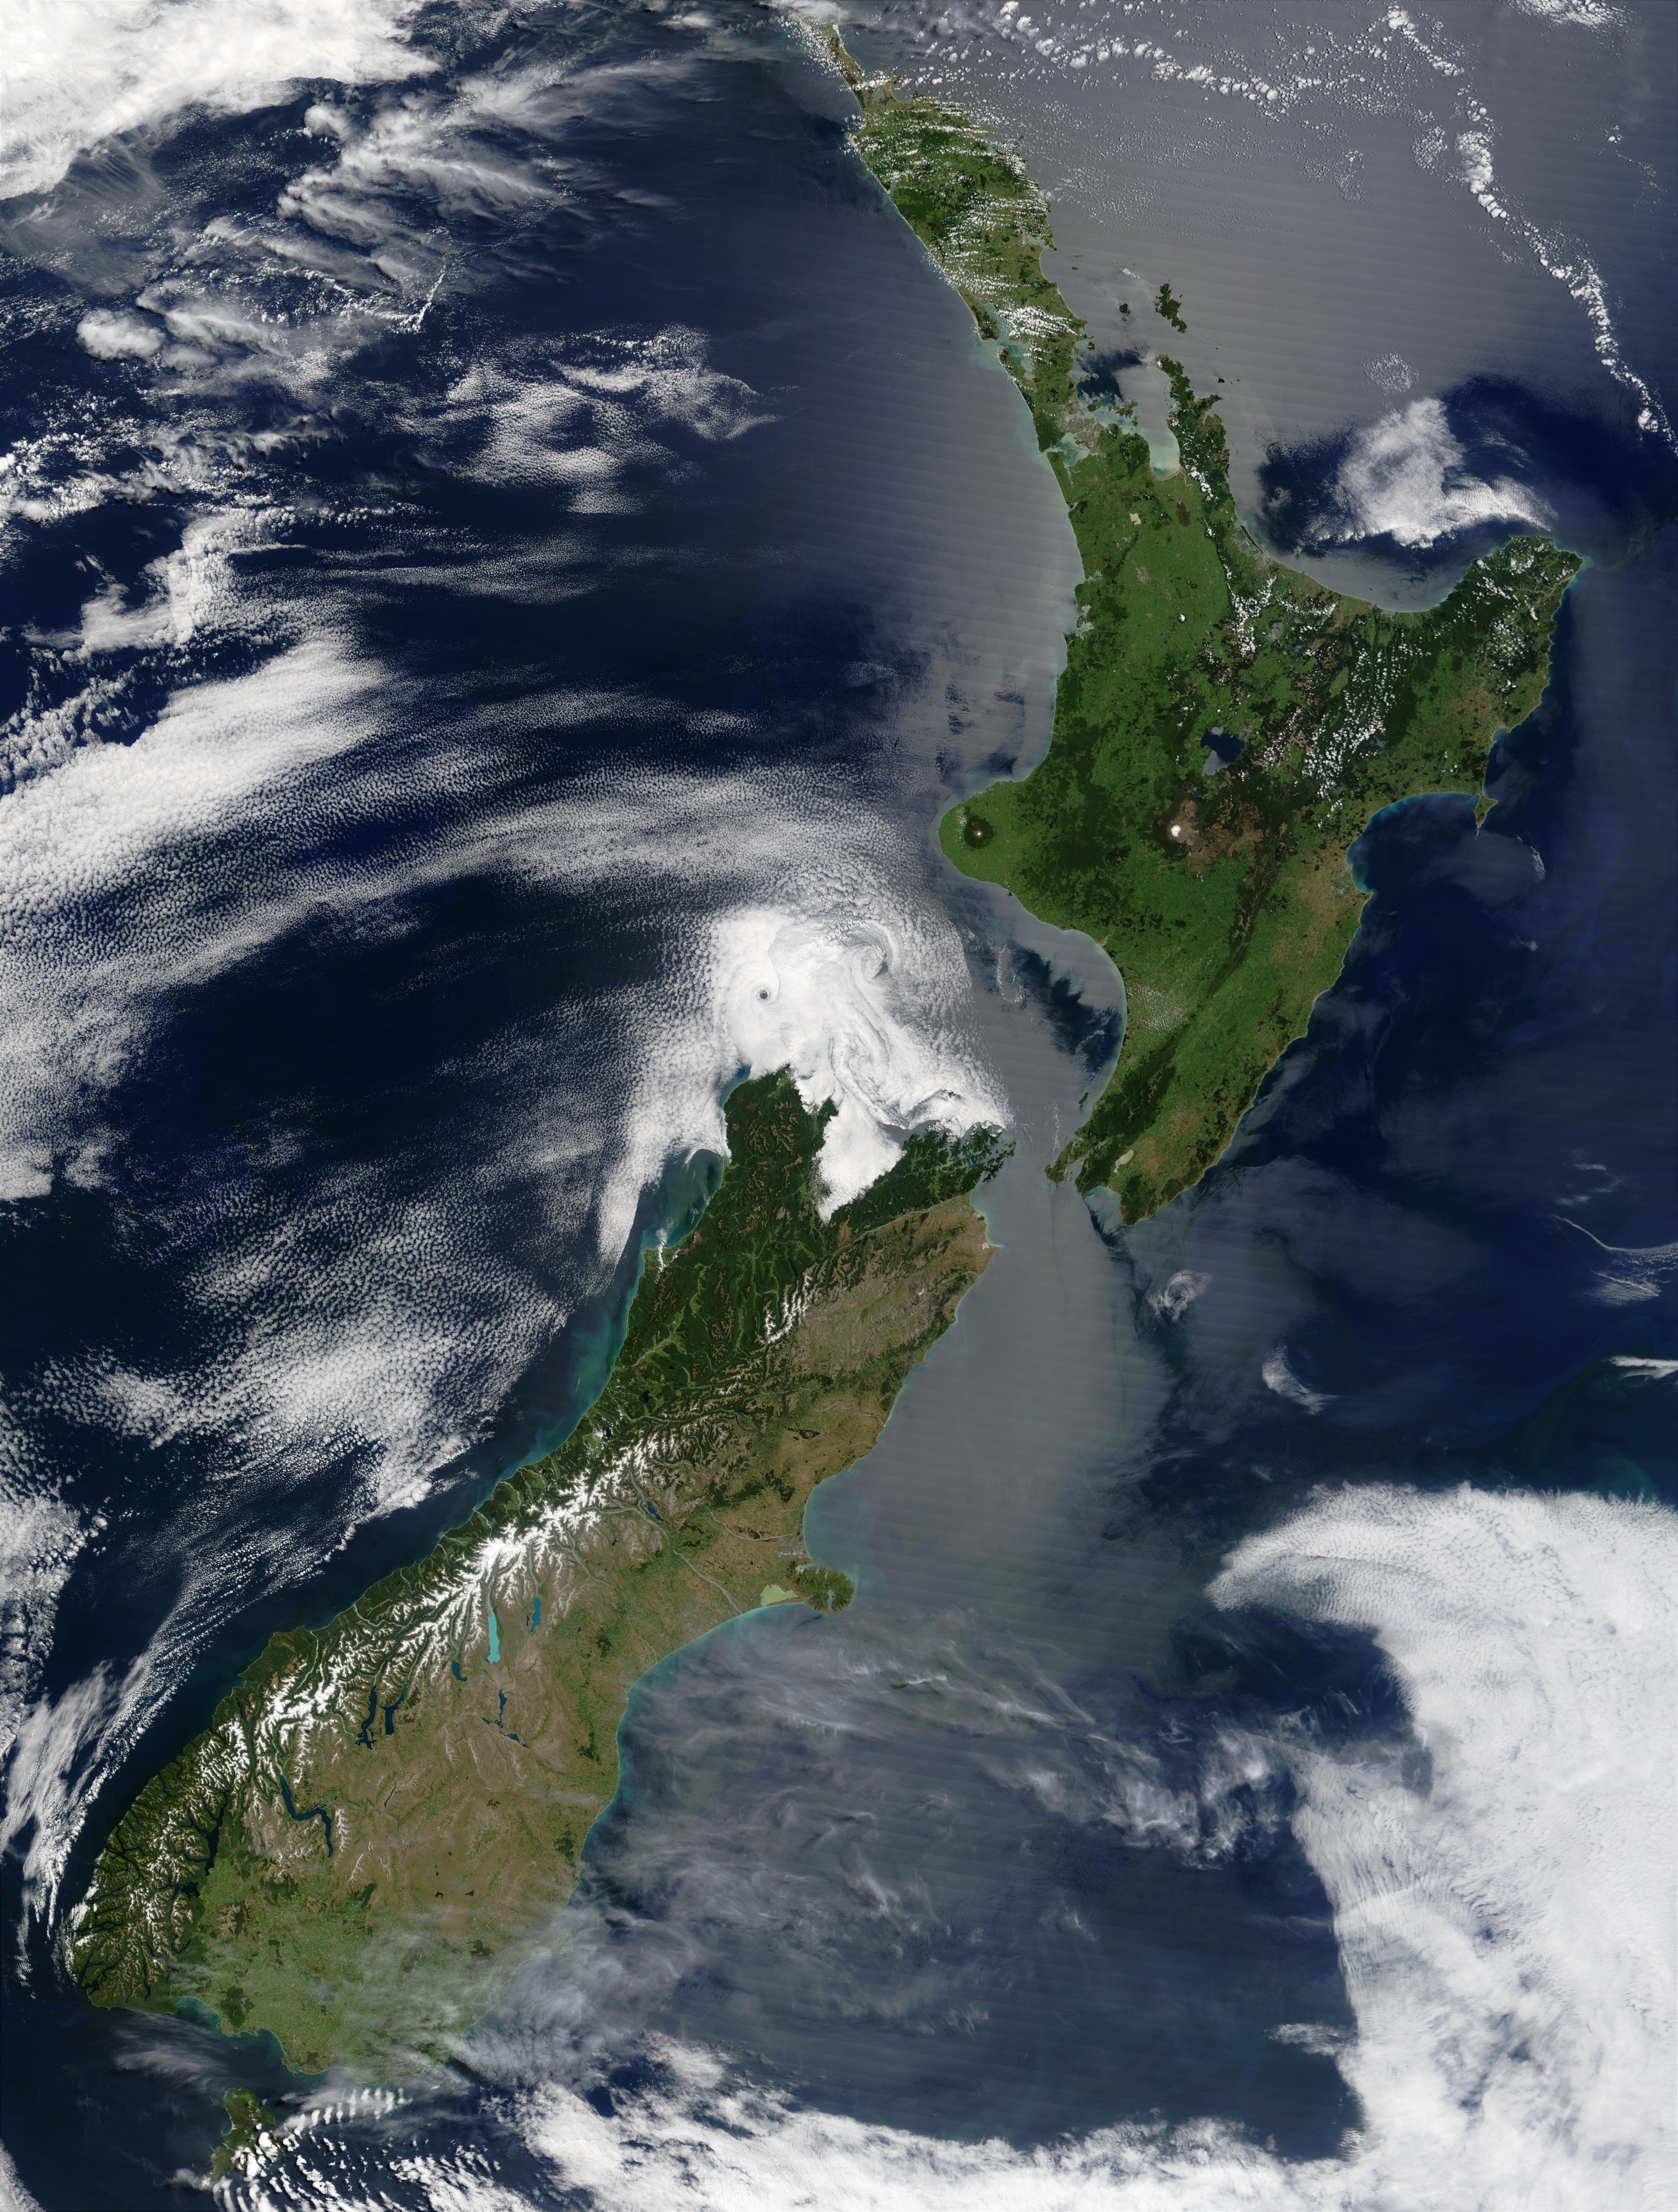 "Satellite image of New Zealand in December 2002" by Unknown - Taken from NASA's Visible Earth: [1]. Licensed under Public Domain via Wikimedia Commons - https://commons.wikimedia.org/wiki/File:Satellite_image_of_New_Zealand_in_December_2002.jpg#/media/File:Satellite_image_of_New_Zealand_in_December_2002.jpg